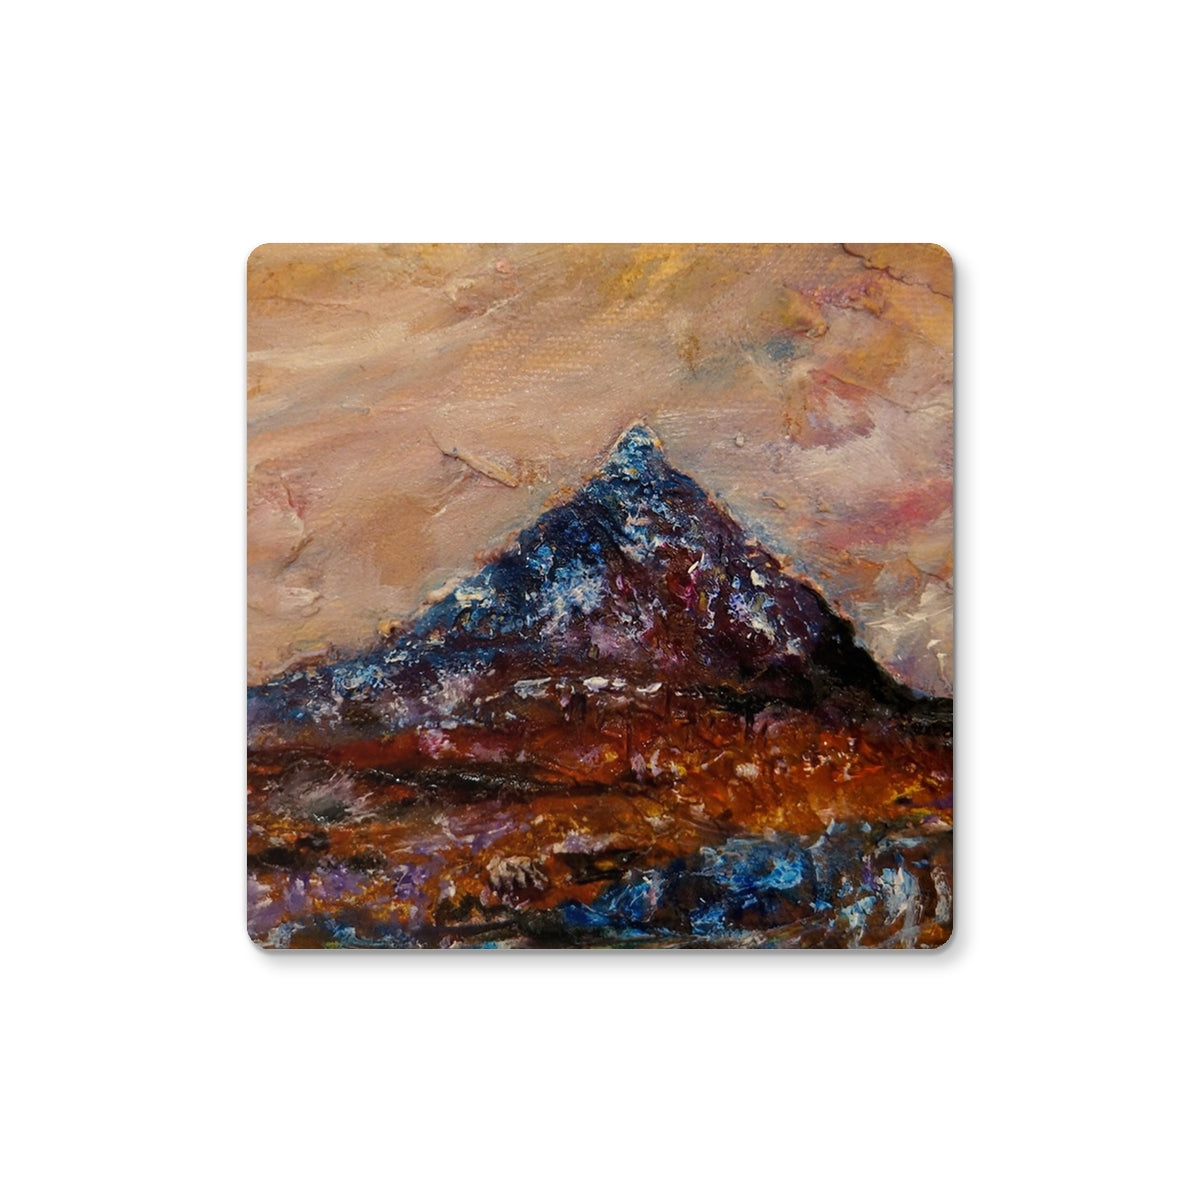 Buachaille Etive Mòr Art Gifts Coaster-Coasters-Glencoe Art Gallery-4 Coasters-Paintings, Prints, Homeware, Art Gifts From Scotland By Scottish Artist Kevin Hunter